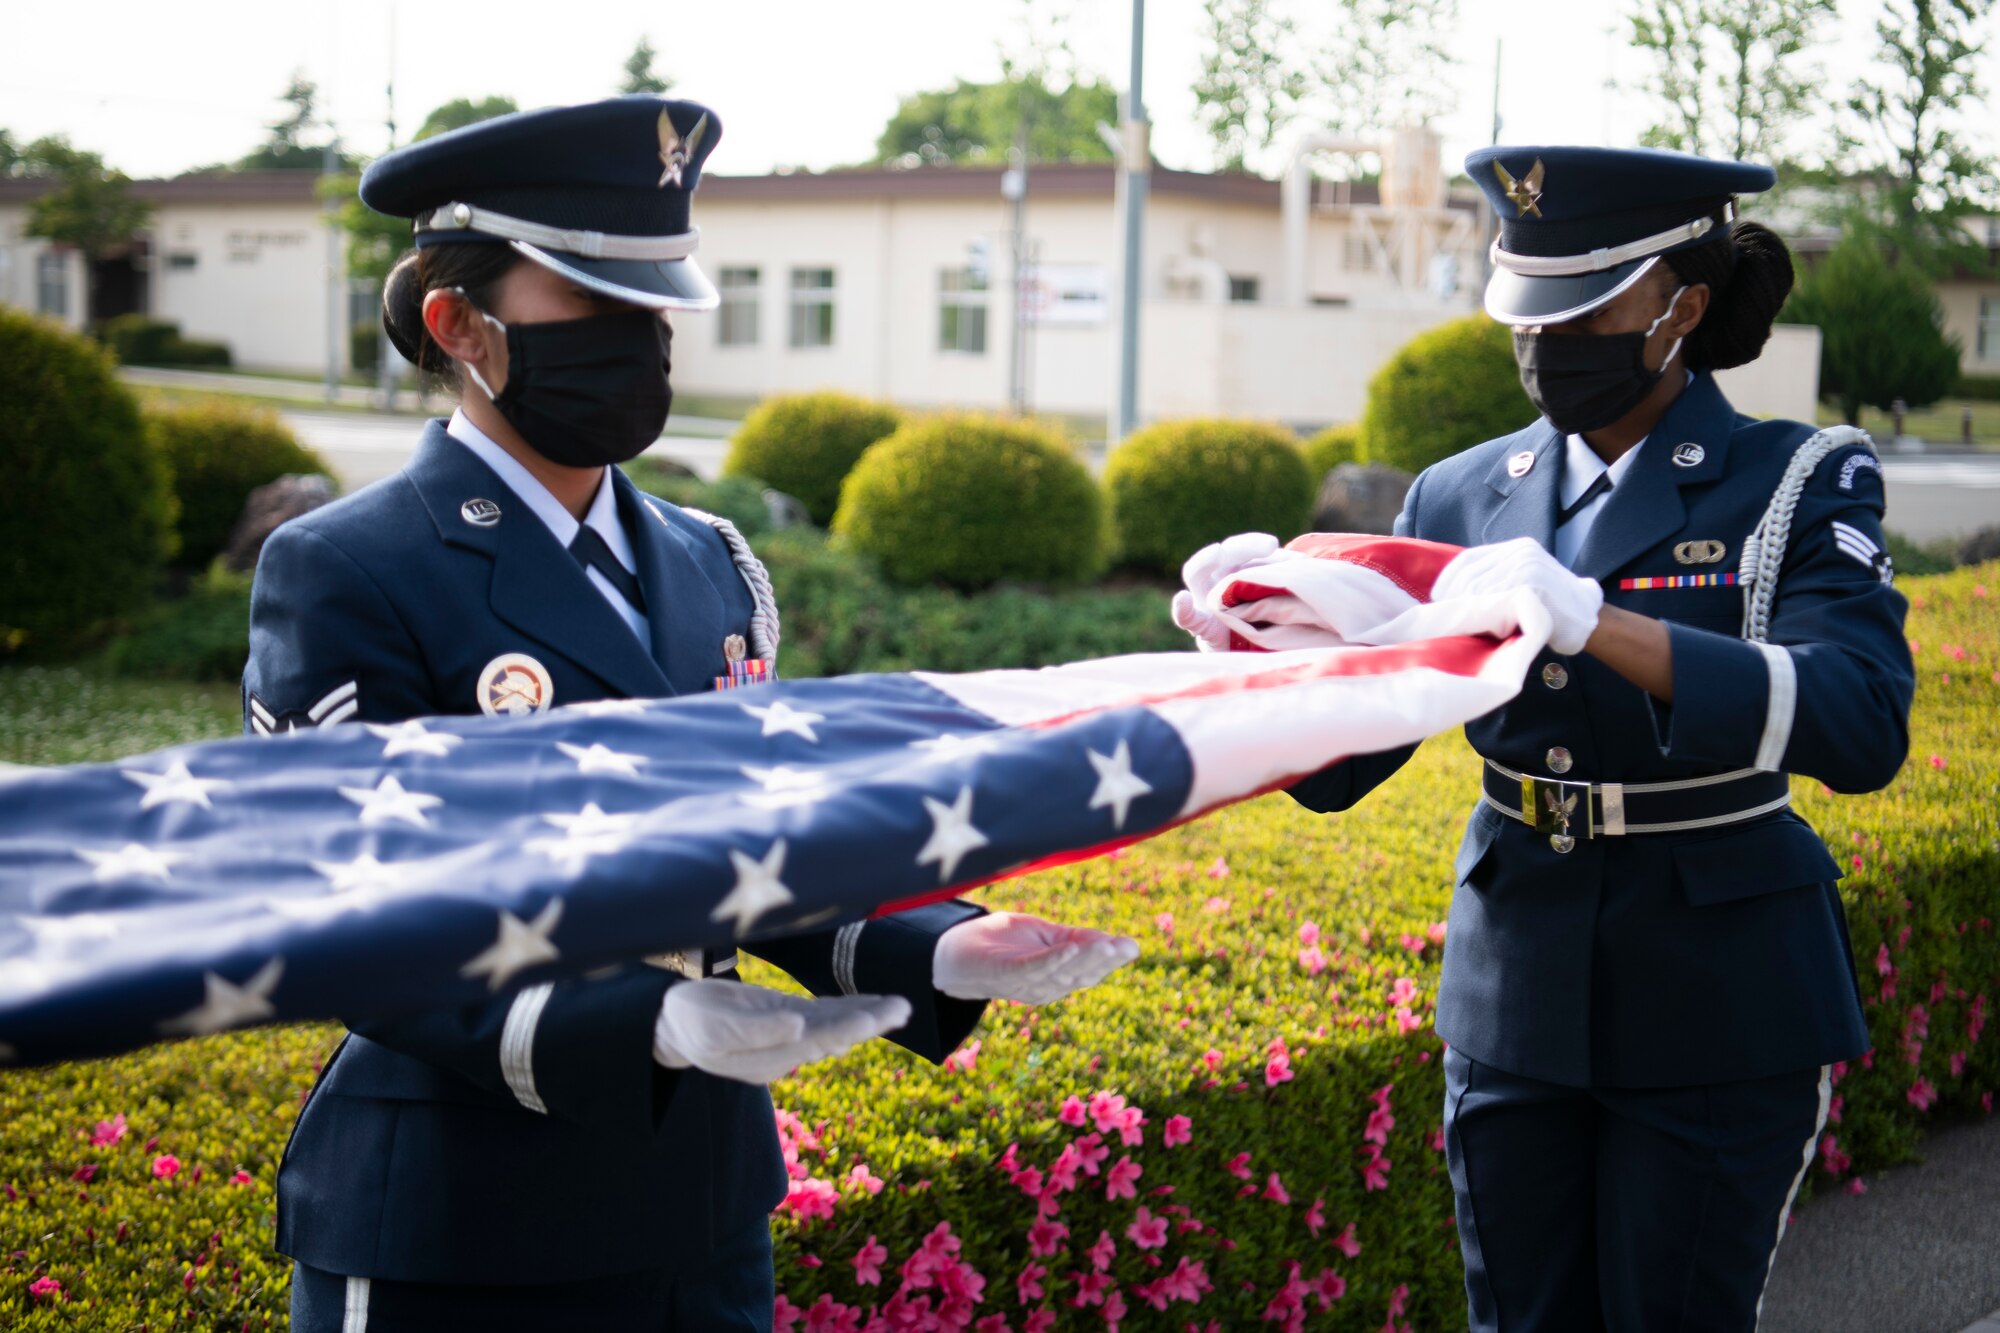 Base honor guard members fold the American flag during the National Police Week retreat ceremony at Yokota Air Base, Japan, May 14, 2021. The honor guard lowered both the American and Japanese flag during a ceremony dedicated to recognizes law enforcement individuals. (U.S. Air Force photo by Staff Sgt. Braden Anderson)